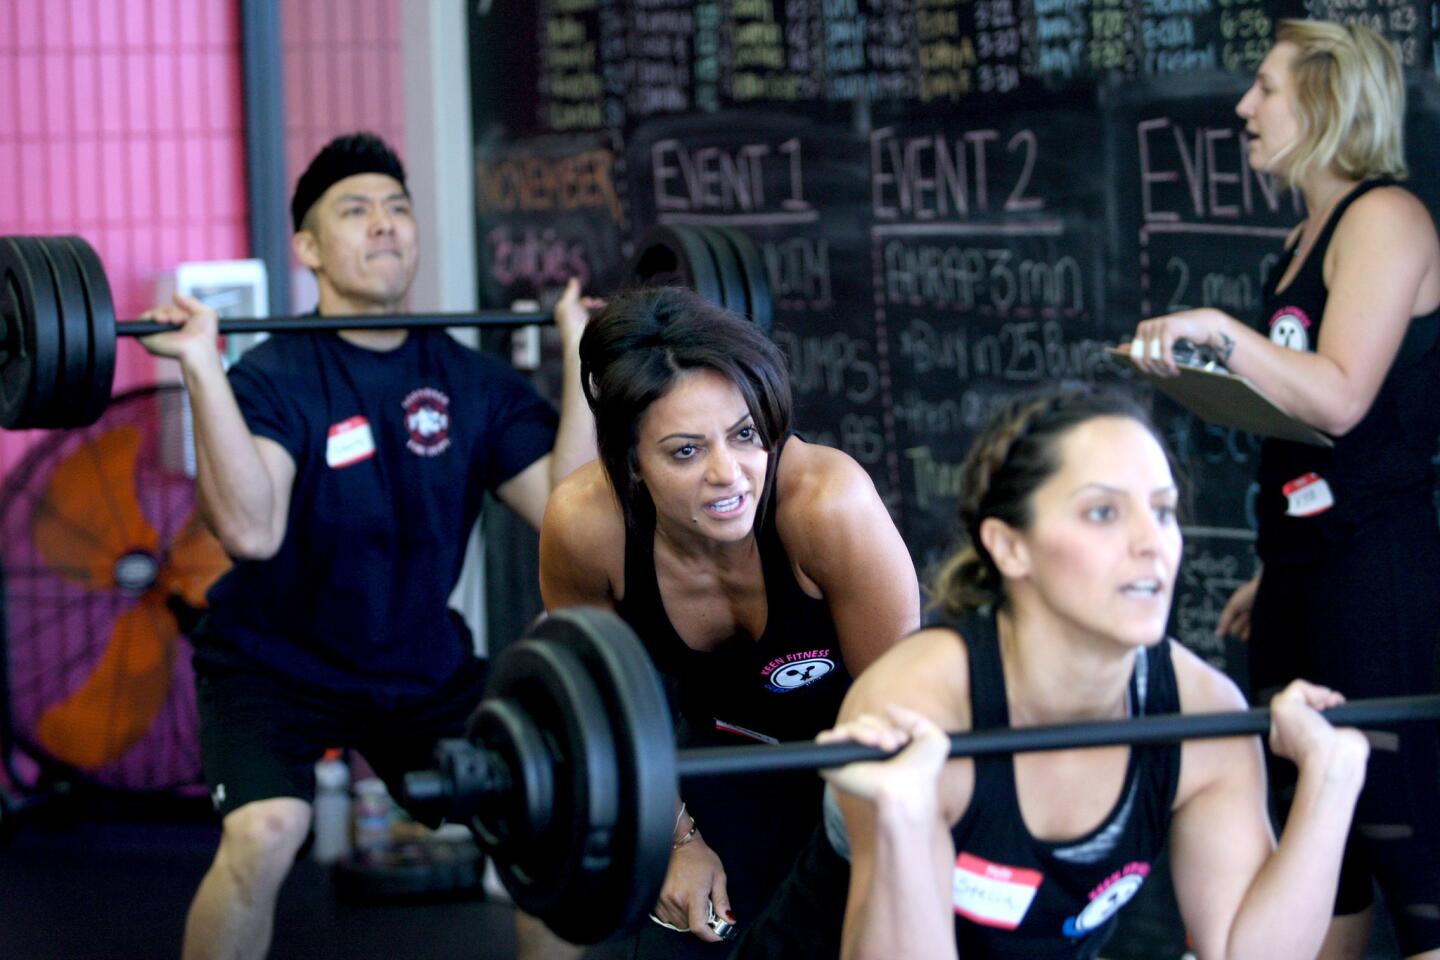 Keen Fitness owner Ankeen Soulat, center, encourages competitor Stella Amirganian, front, during fundraising event with Glendale Fire Dept. personnel to raise funds for Firefighters Quest For Burn Survivors at Keen Fitness in Montrose on Saturday, November 7, 2015.